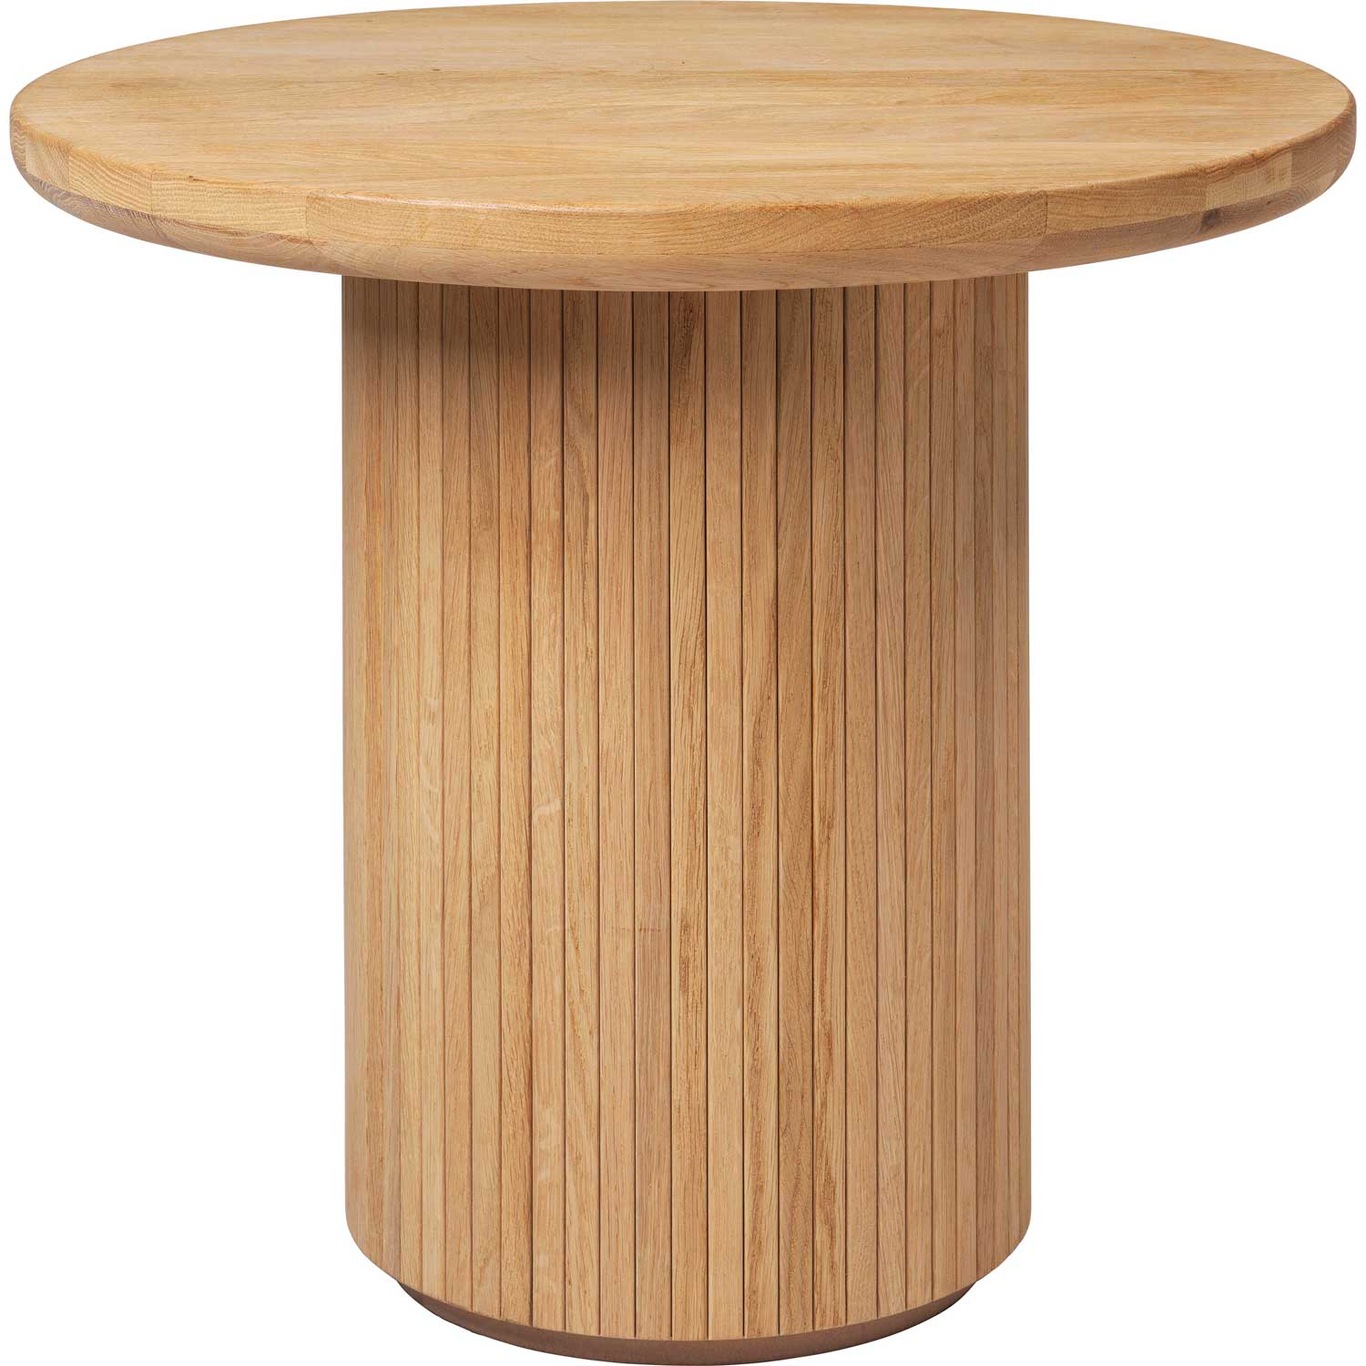 Moon Lounge Table Round Ø60 x H55 cm, Solid Oiled Oak